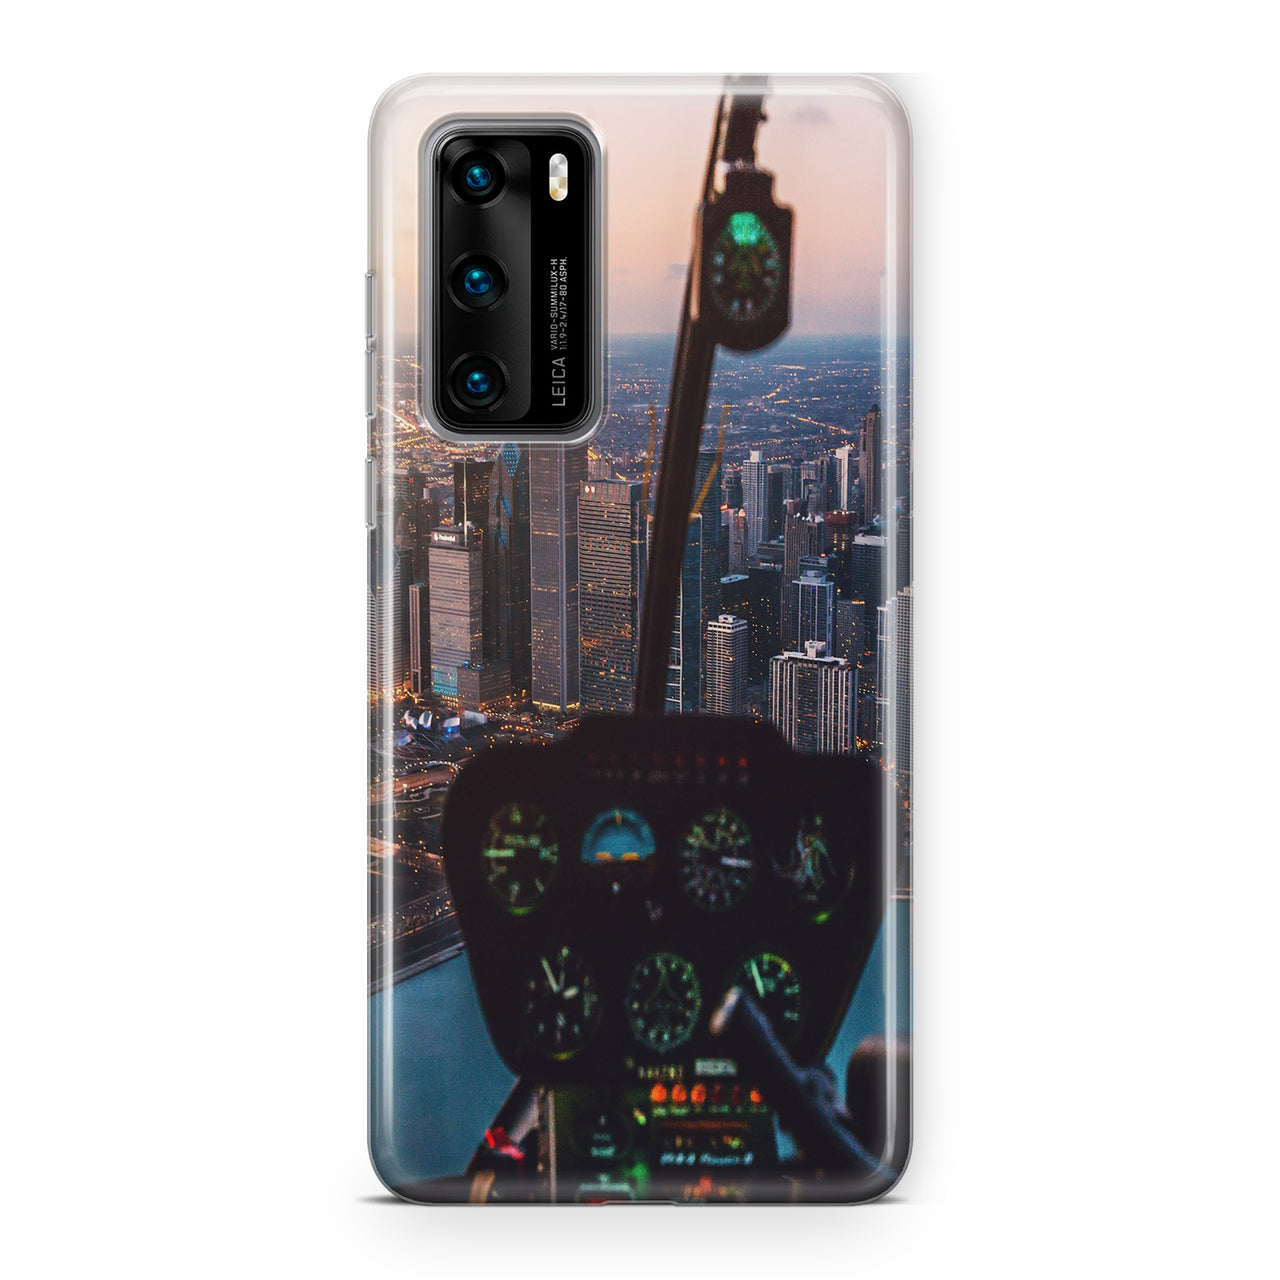 Amazing City View from Helicopter Cockpit Designed Huawei Cases